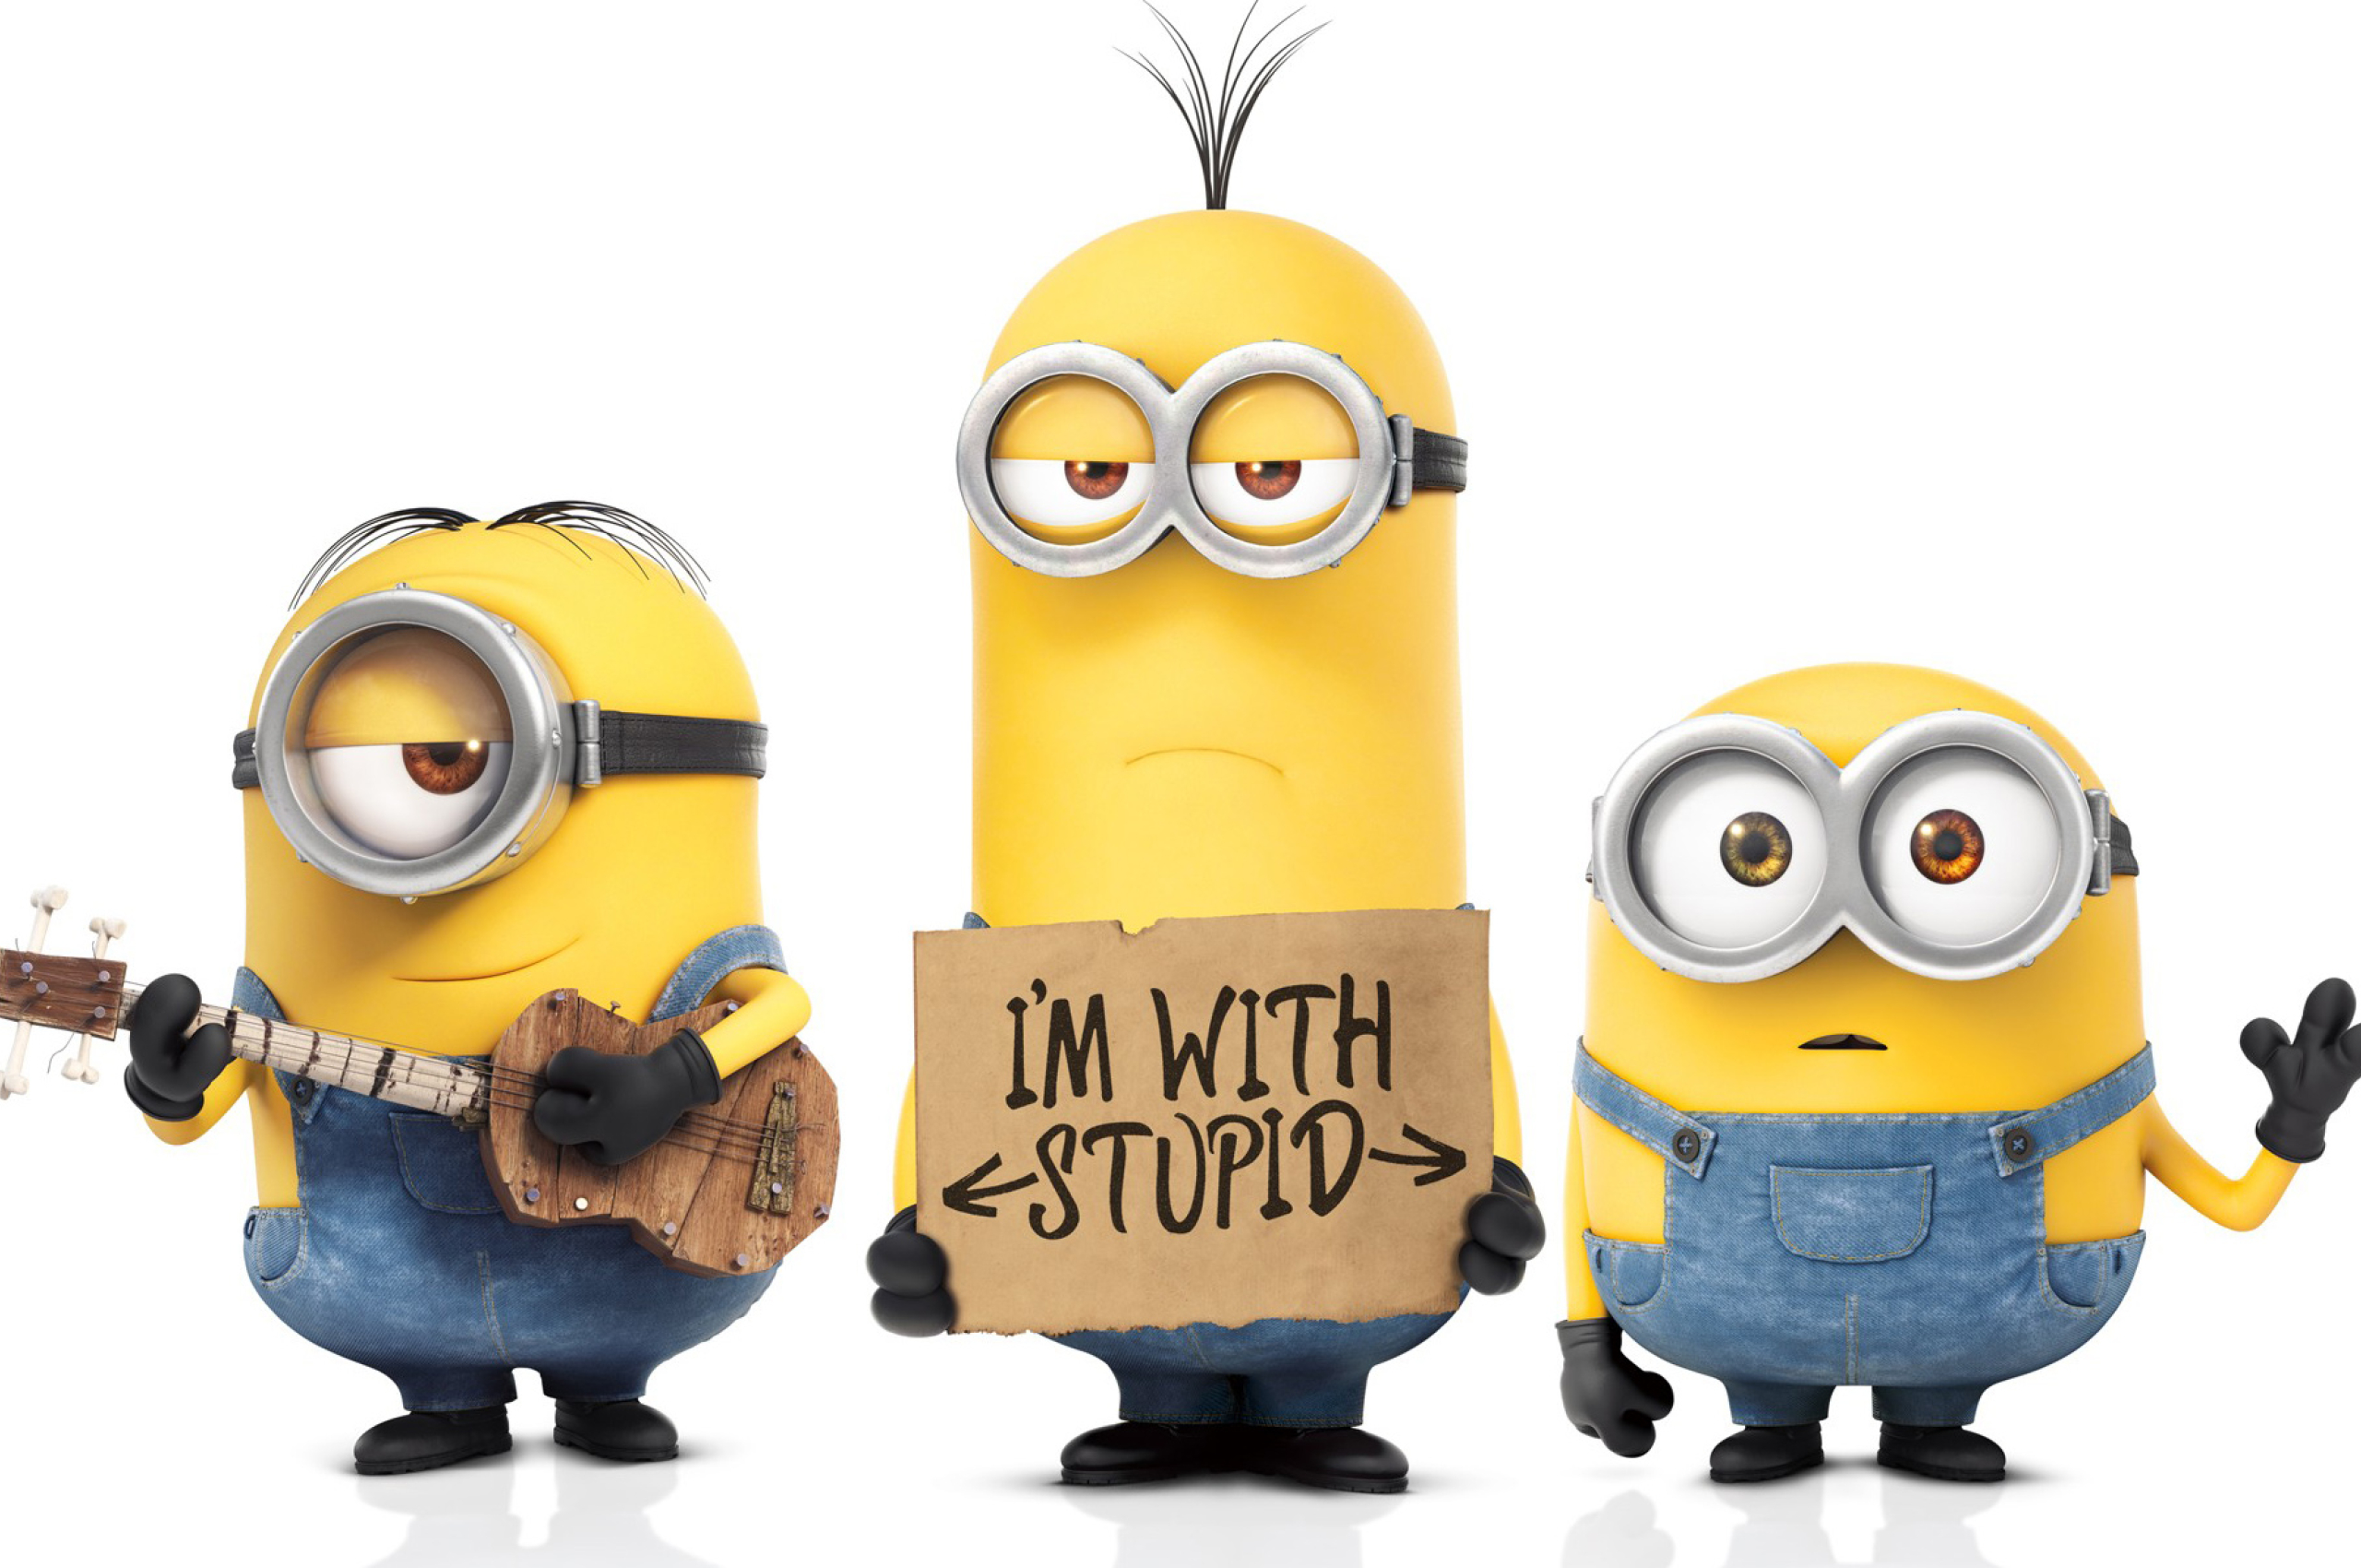 2560x1700 Minions 2015 Funny Wallpapers Chromebook Pixel Wallpaper Hd Movies 4k Wallpapers Images Photos And Background Browse and download the cutest wallpapers for your chromebook in hd or 4k. 2560x1700 minions 2015 funny wallpapers